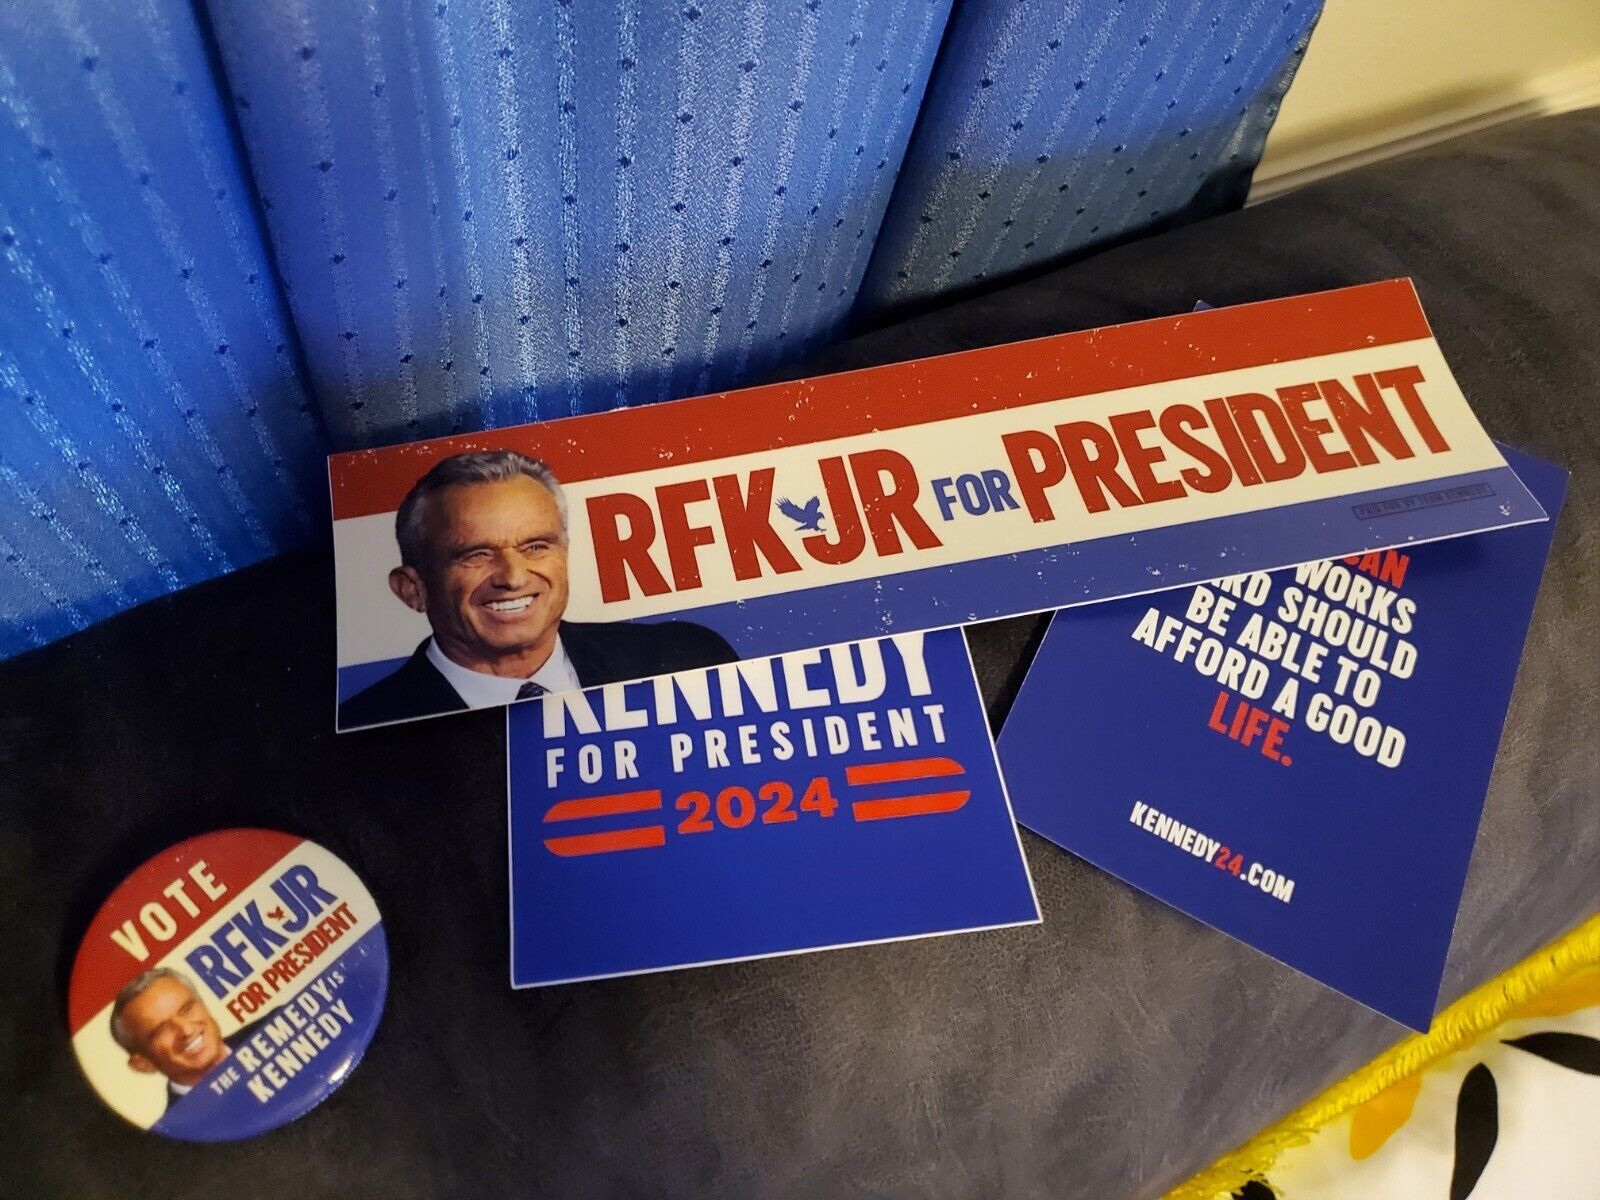 Rfk Jr 2024 Pin And Stickers And Literature